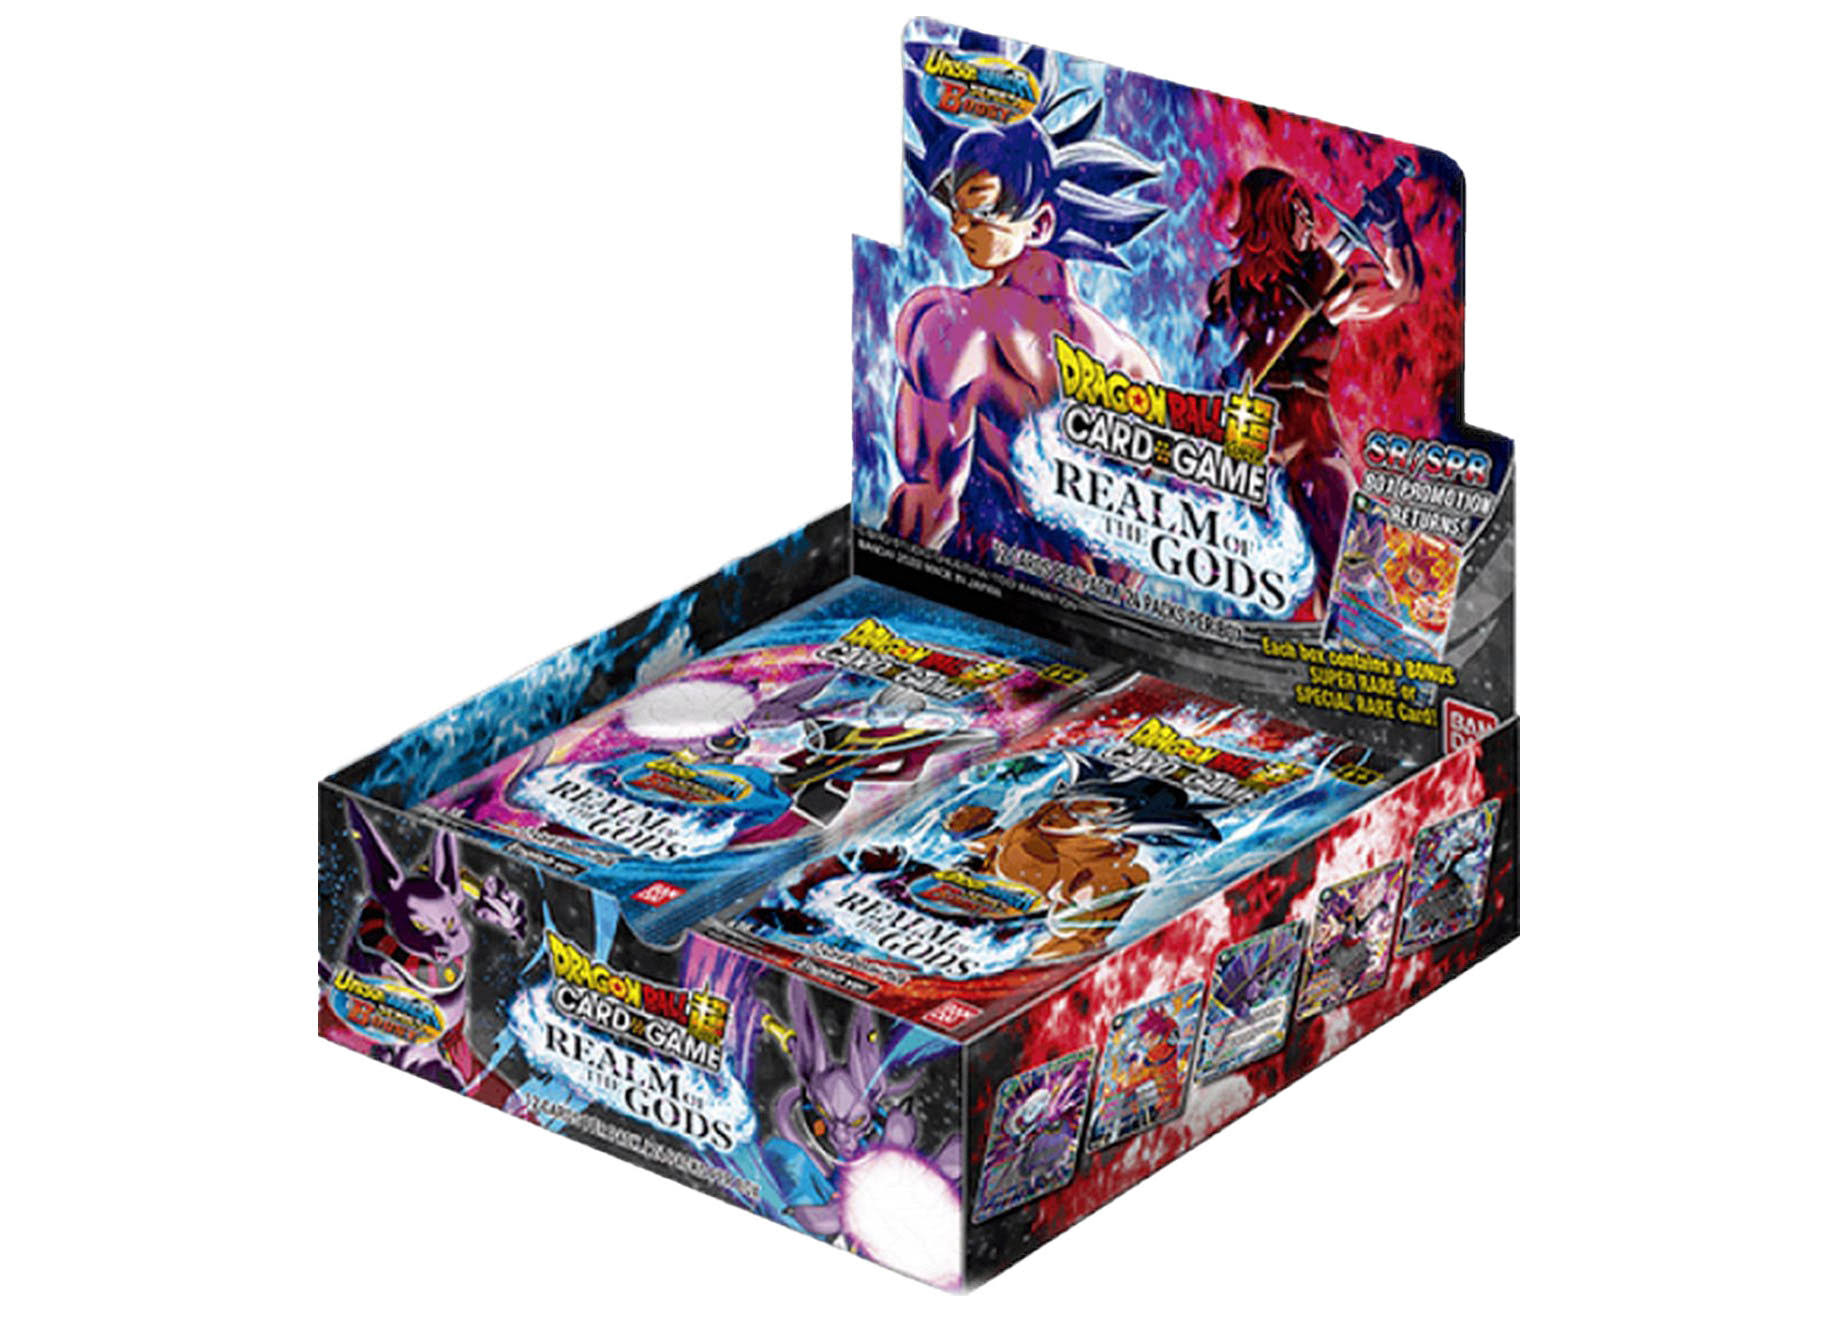 Dragon Ball Super TCG: Realm of The Gods Booster Box